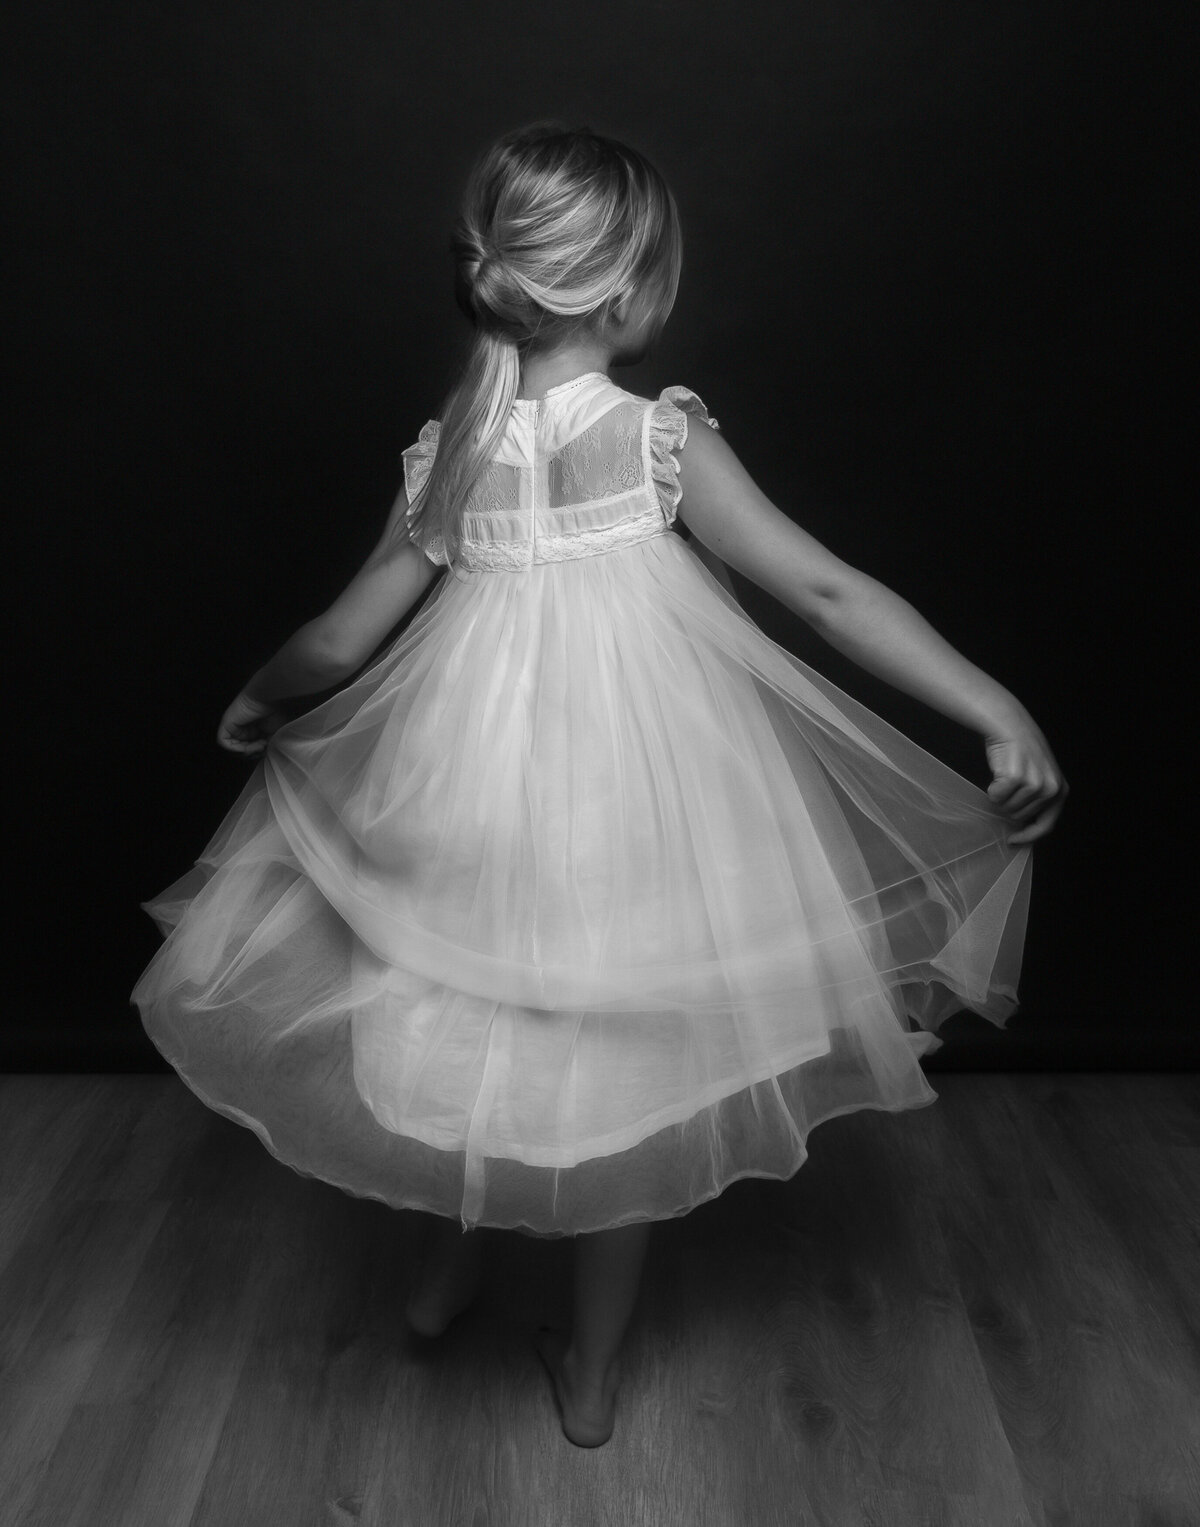 child in flowing satin dress facing backwards with bare feet on studio floor and hands spreading satin dress apart